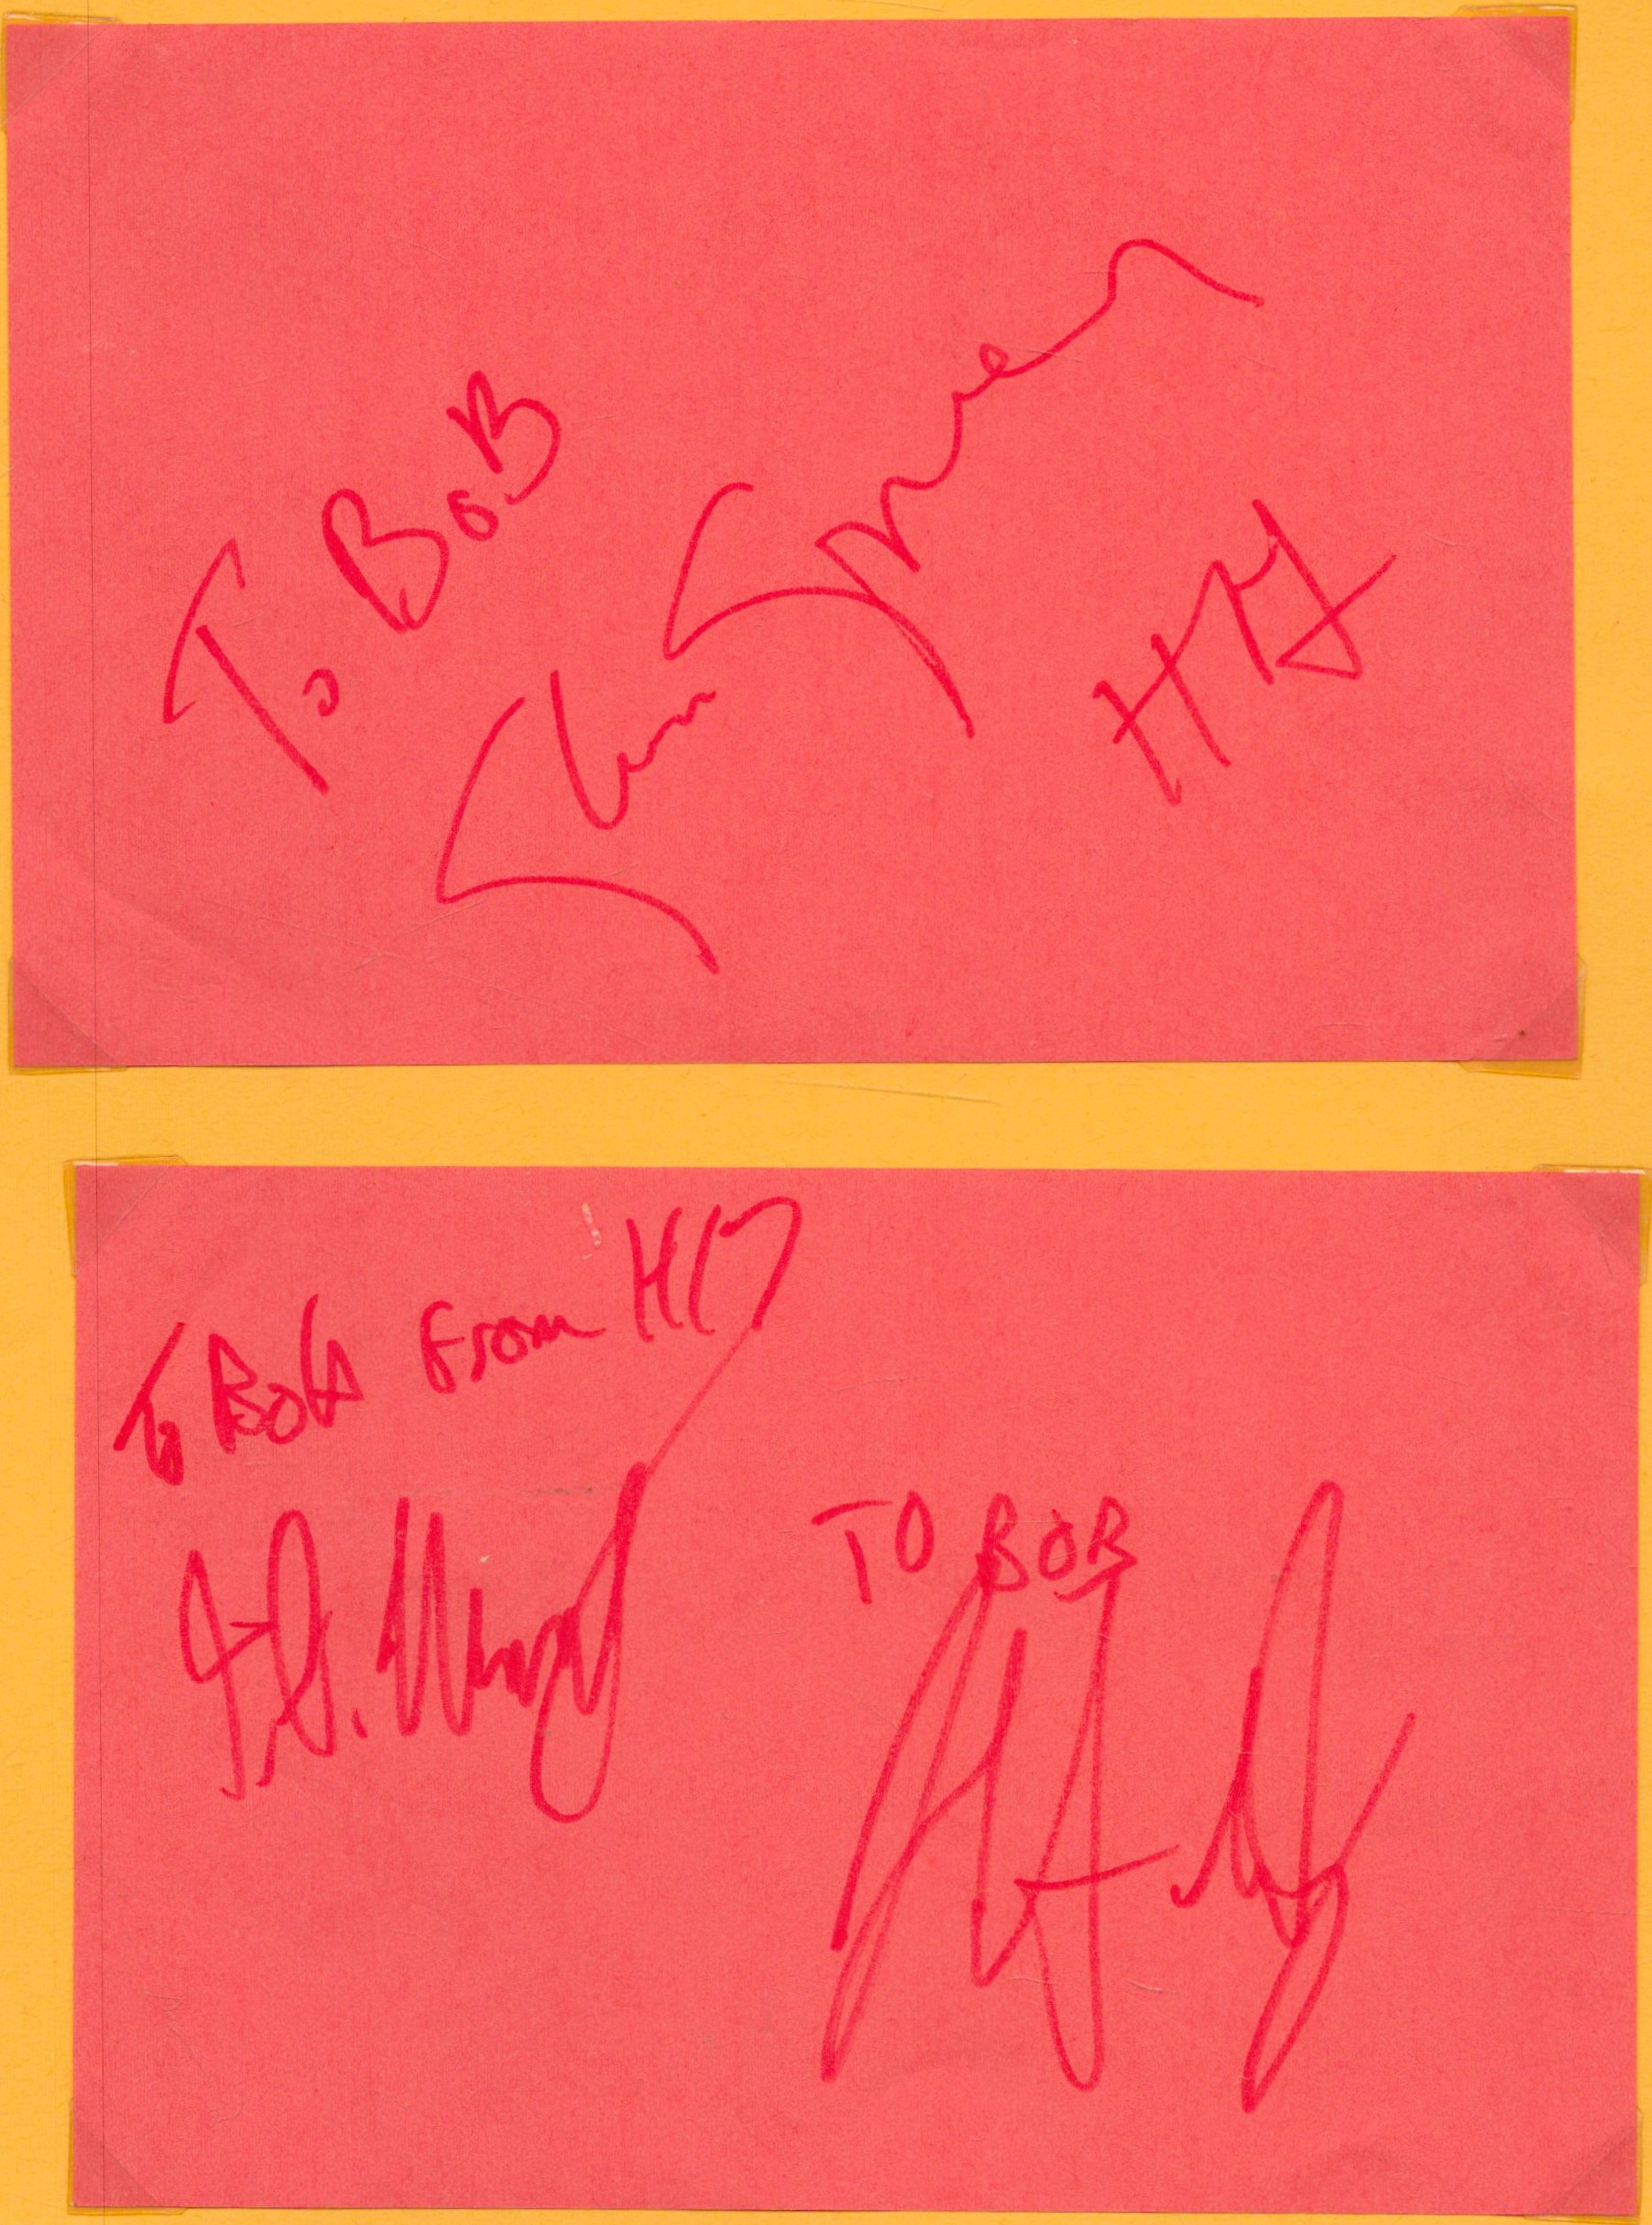 Heaven 17 signatures over 2 6x4inch album pages. Dedicated. Music Autograph. Good condition. All